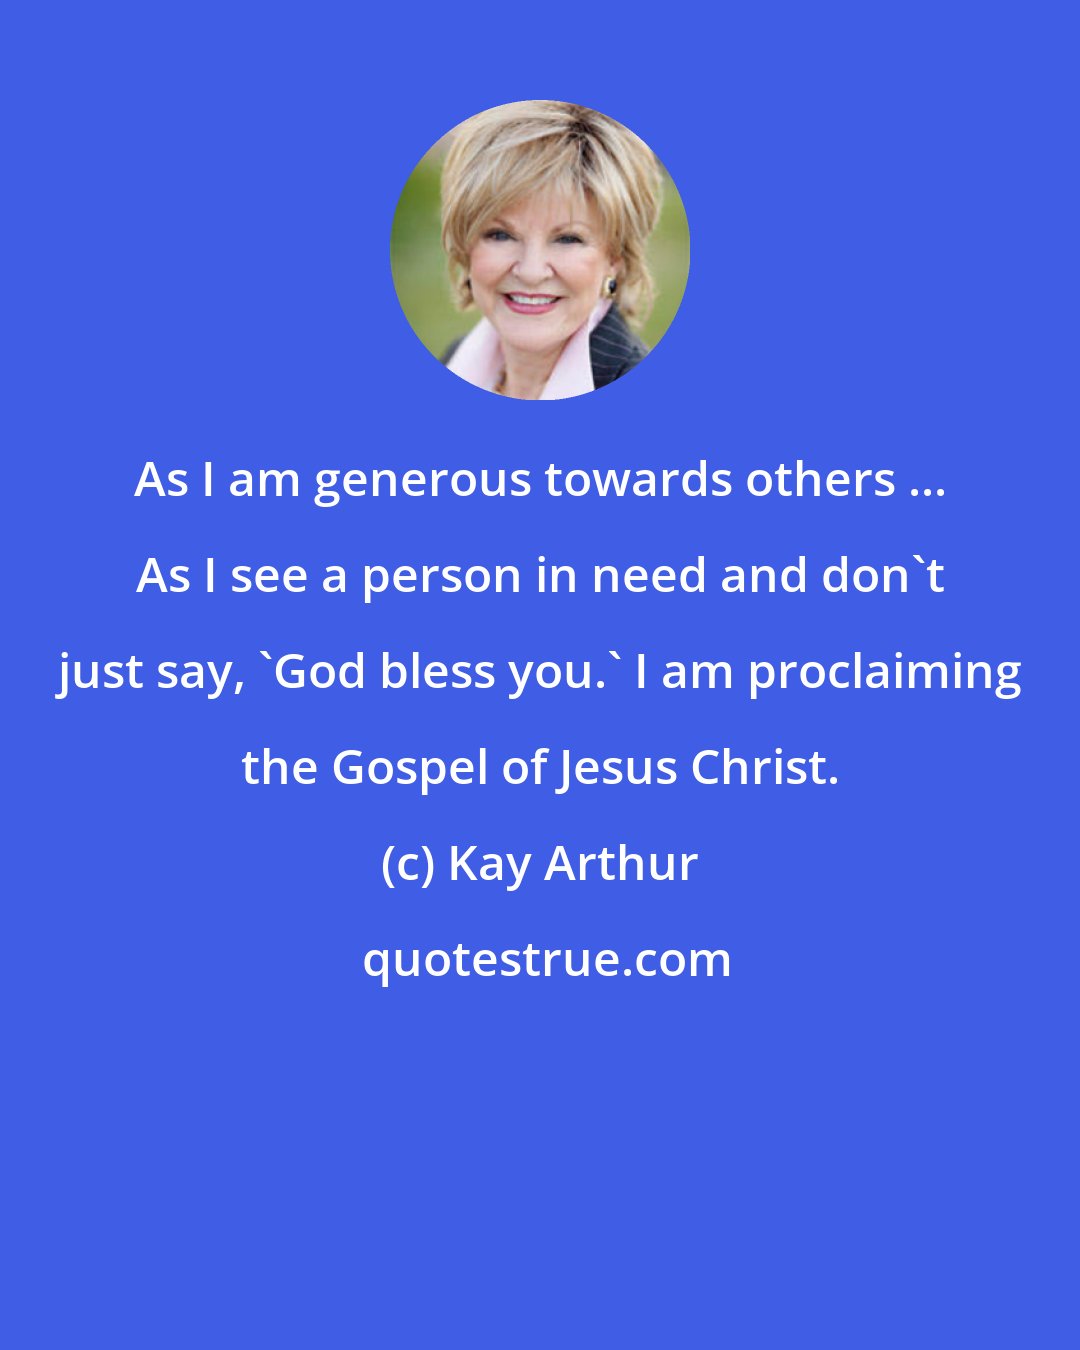 Kay Arthur: As I am generous towards others ... As I see a person in need and don't just say, 'God bless you.' I am proclaiming the Gospel of Jesus Christ.